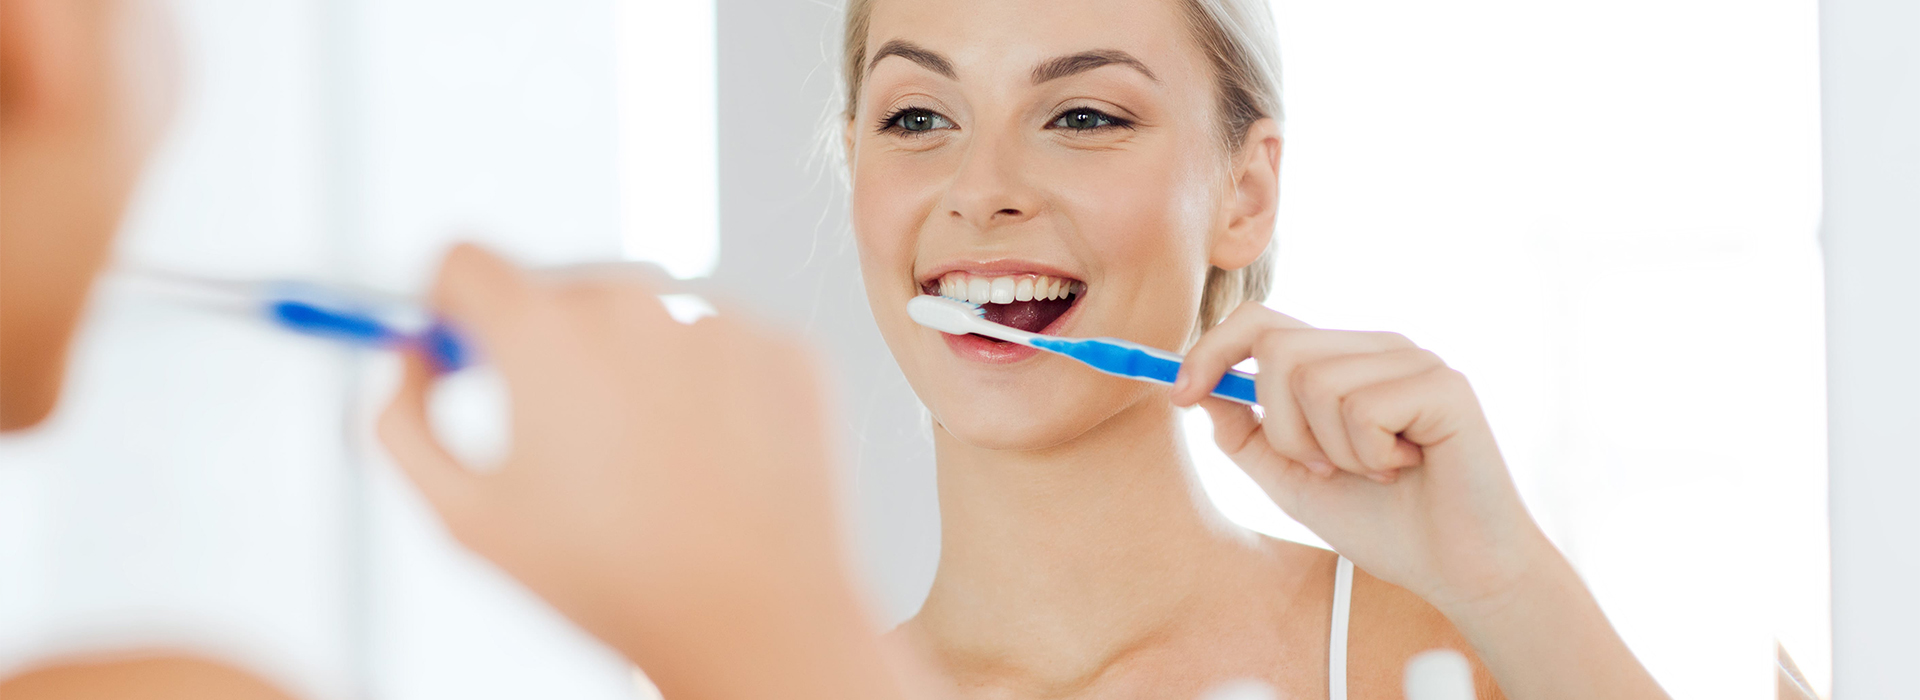 Are Your Brushing Habits Harming Your Teeth And Gums?